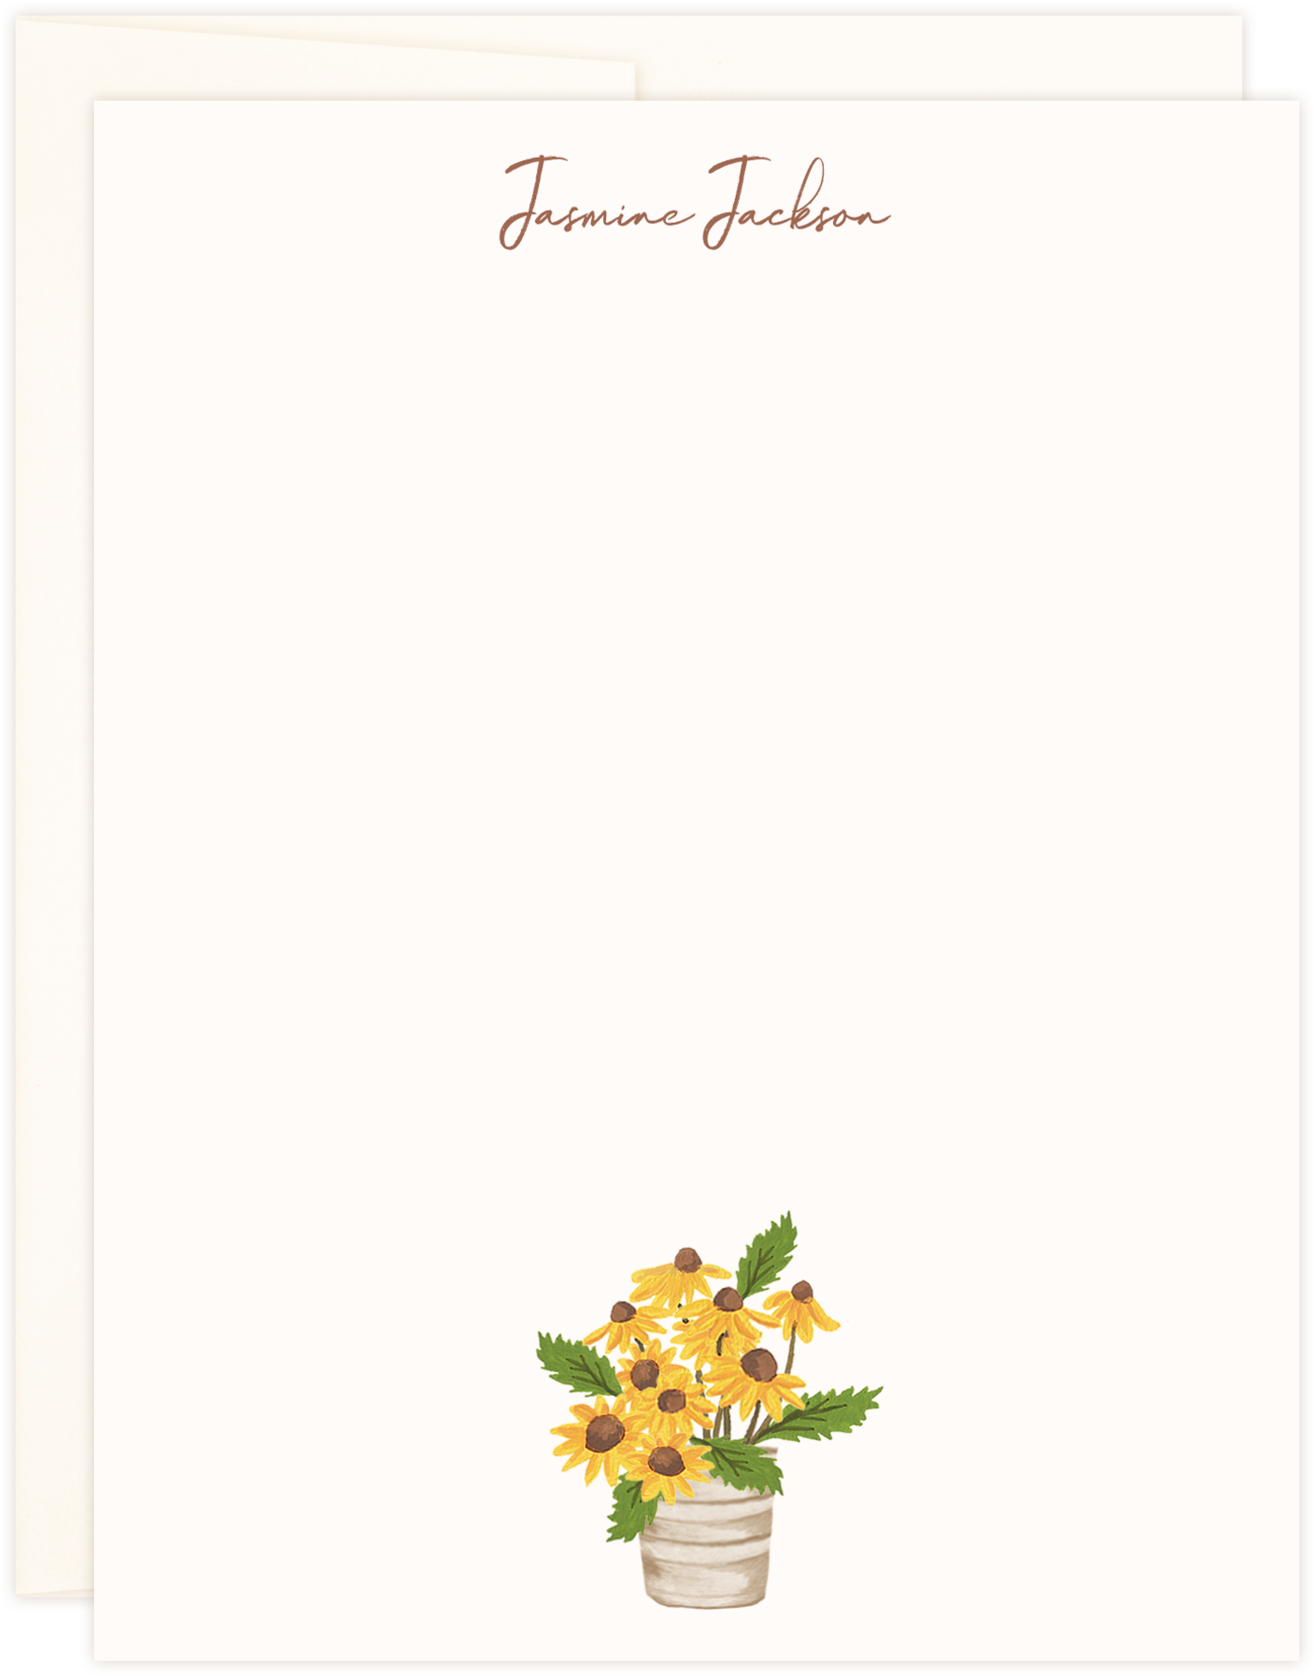 Personalized Stationerywith Floral Design